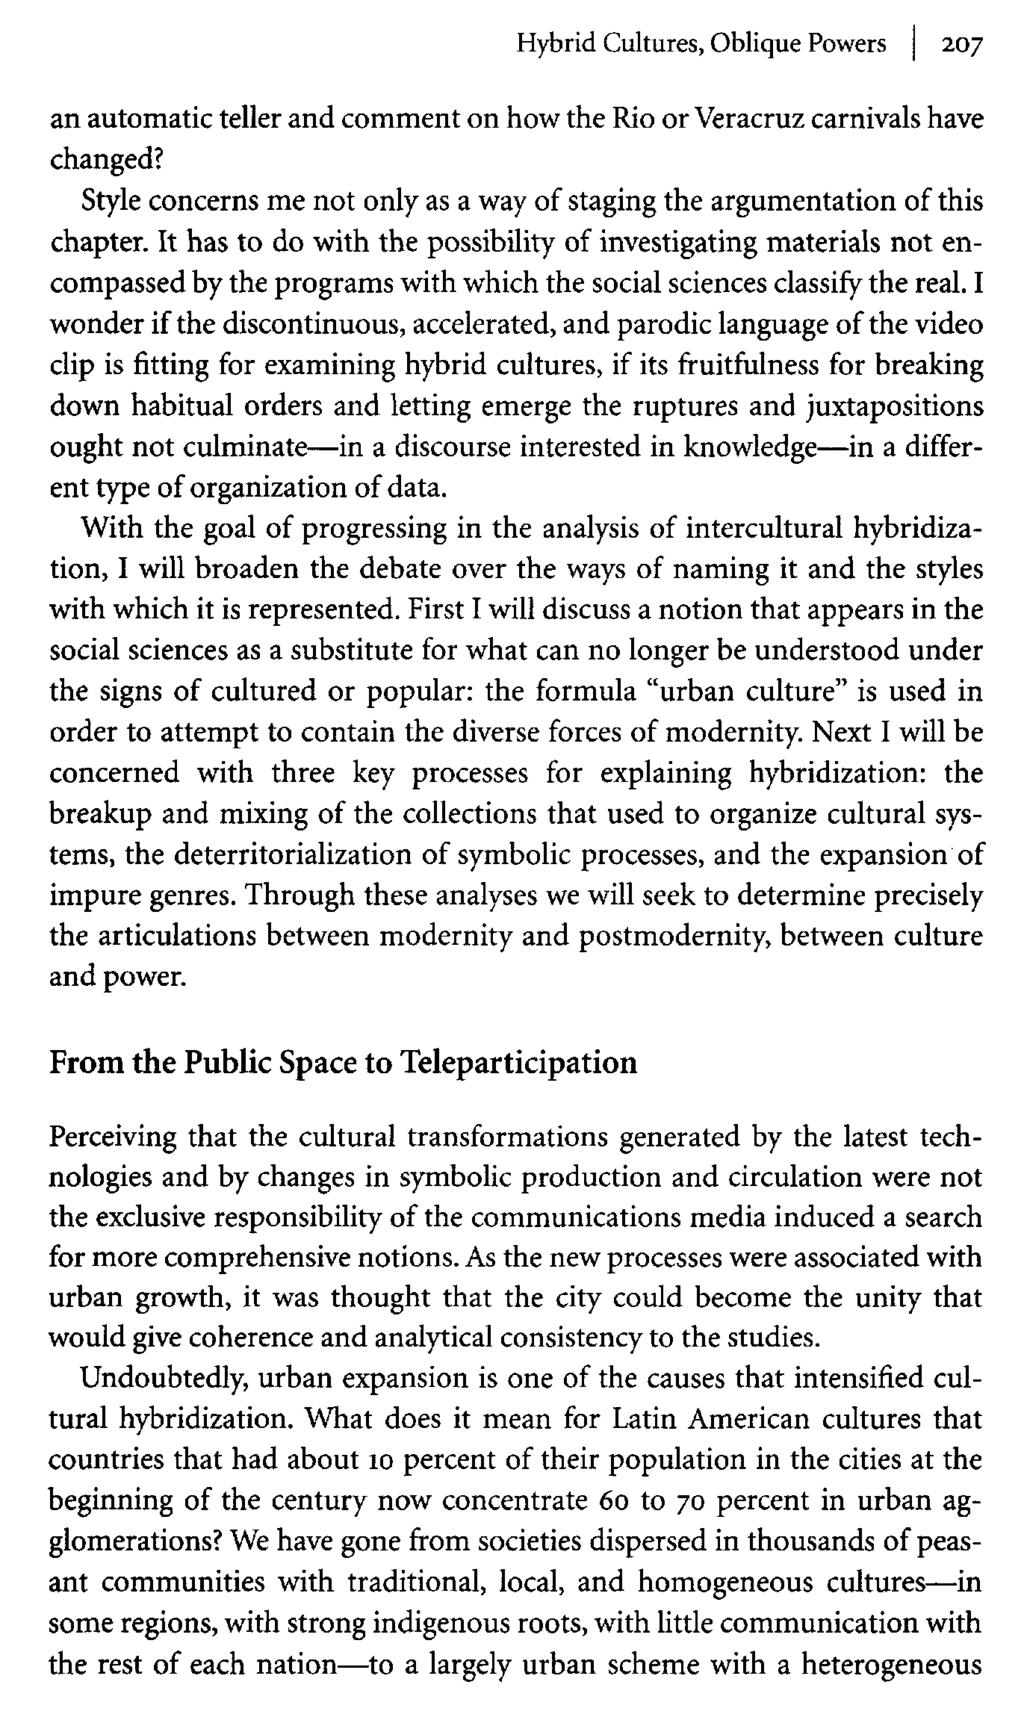 Hybrid Cultures, Oblique Powers 207 an automatic teller and comment on how the Rio or Veracruz carnivals have changed? Style concerns me not only as a way of staging the argumentation of this chapter.